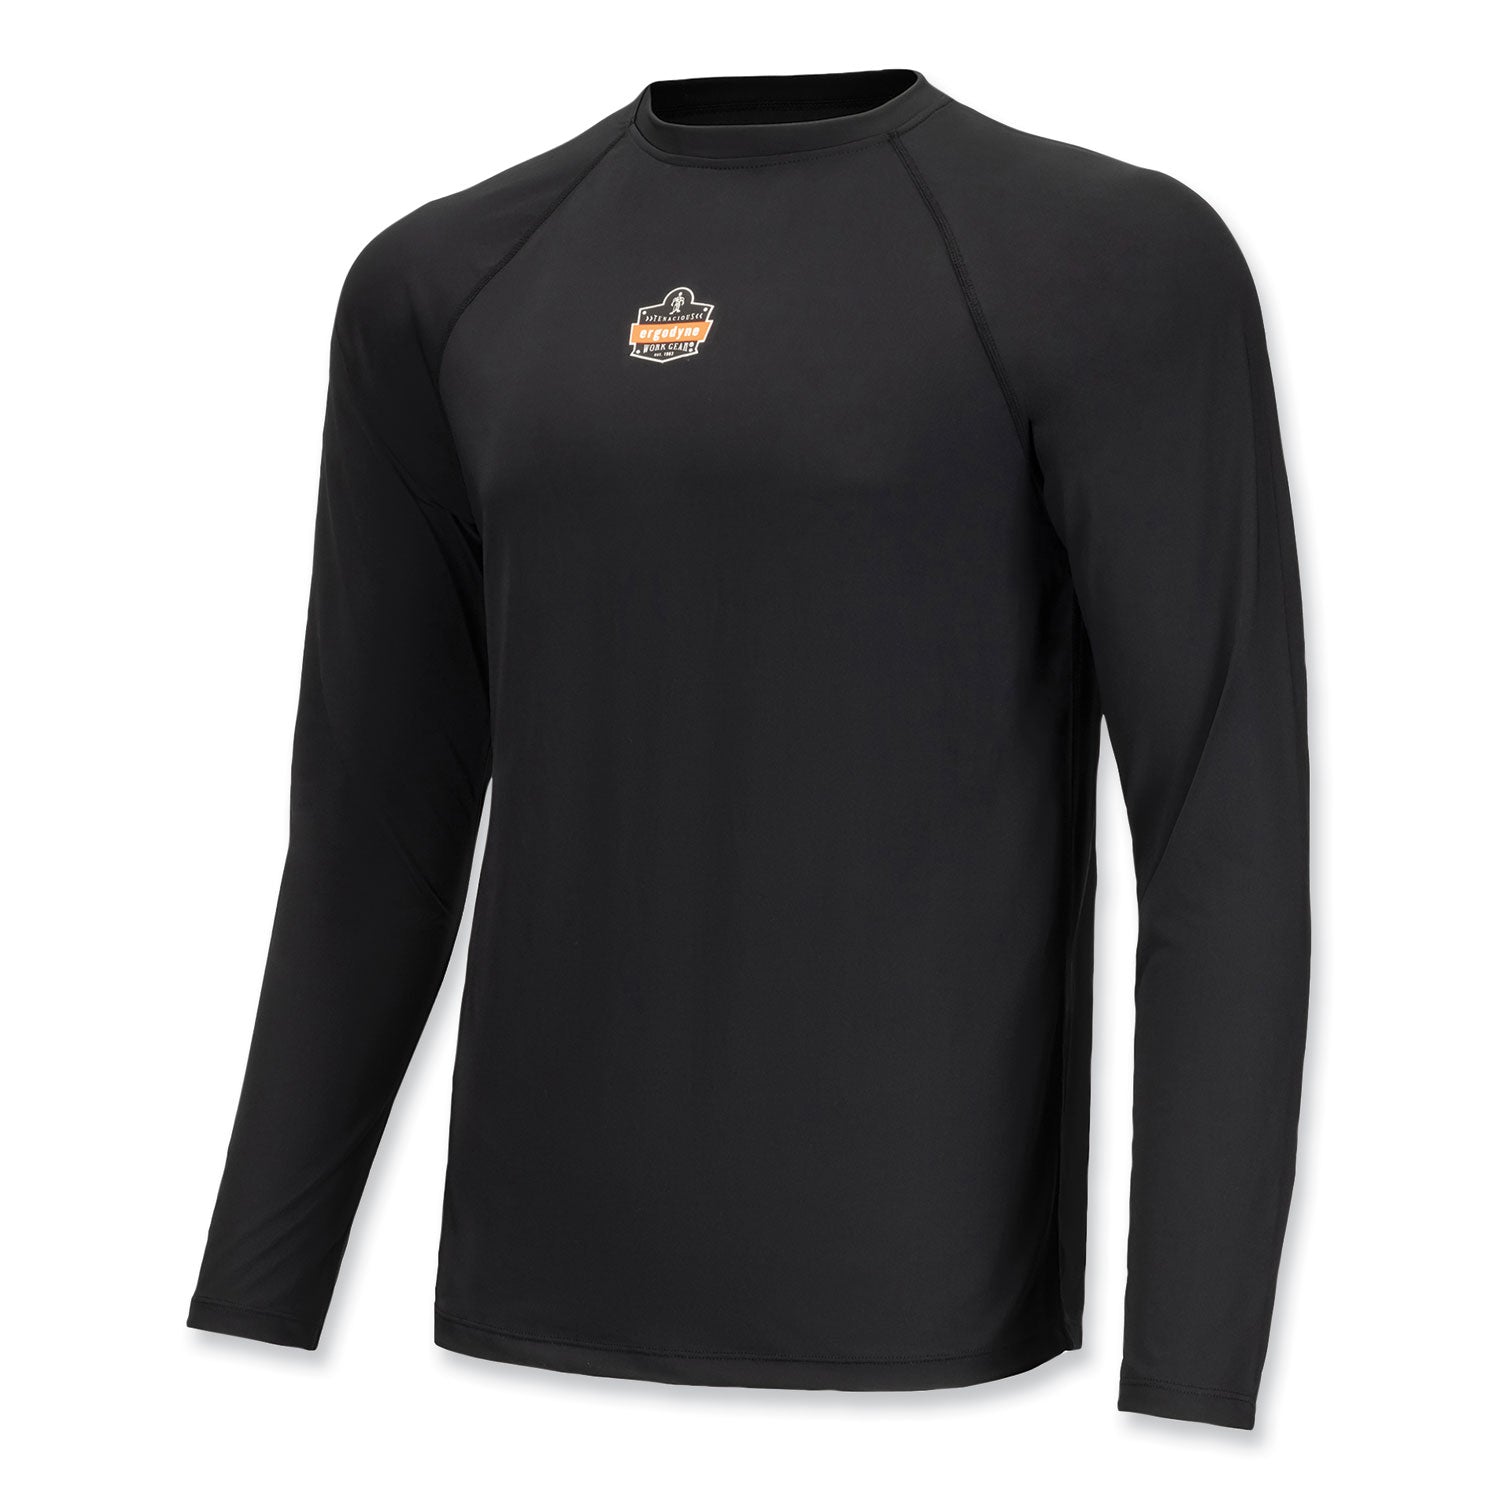 n-ferno-6436-long-sleeve-lightweight-base-layer-shirt-x-large-black-ships-in-1-3-business-days_ego40235 - 1